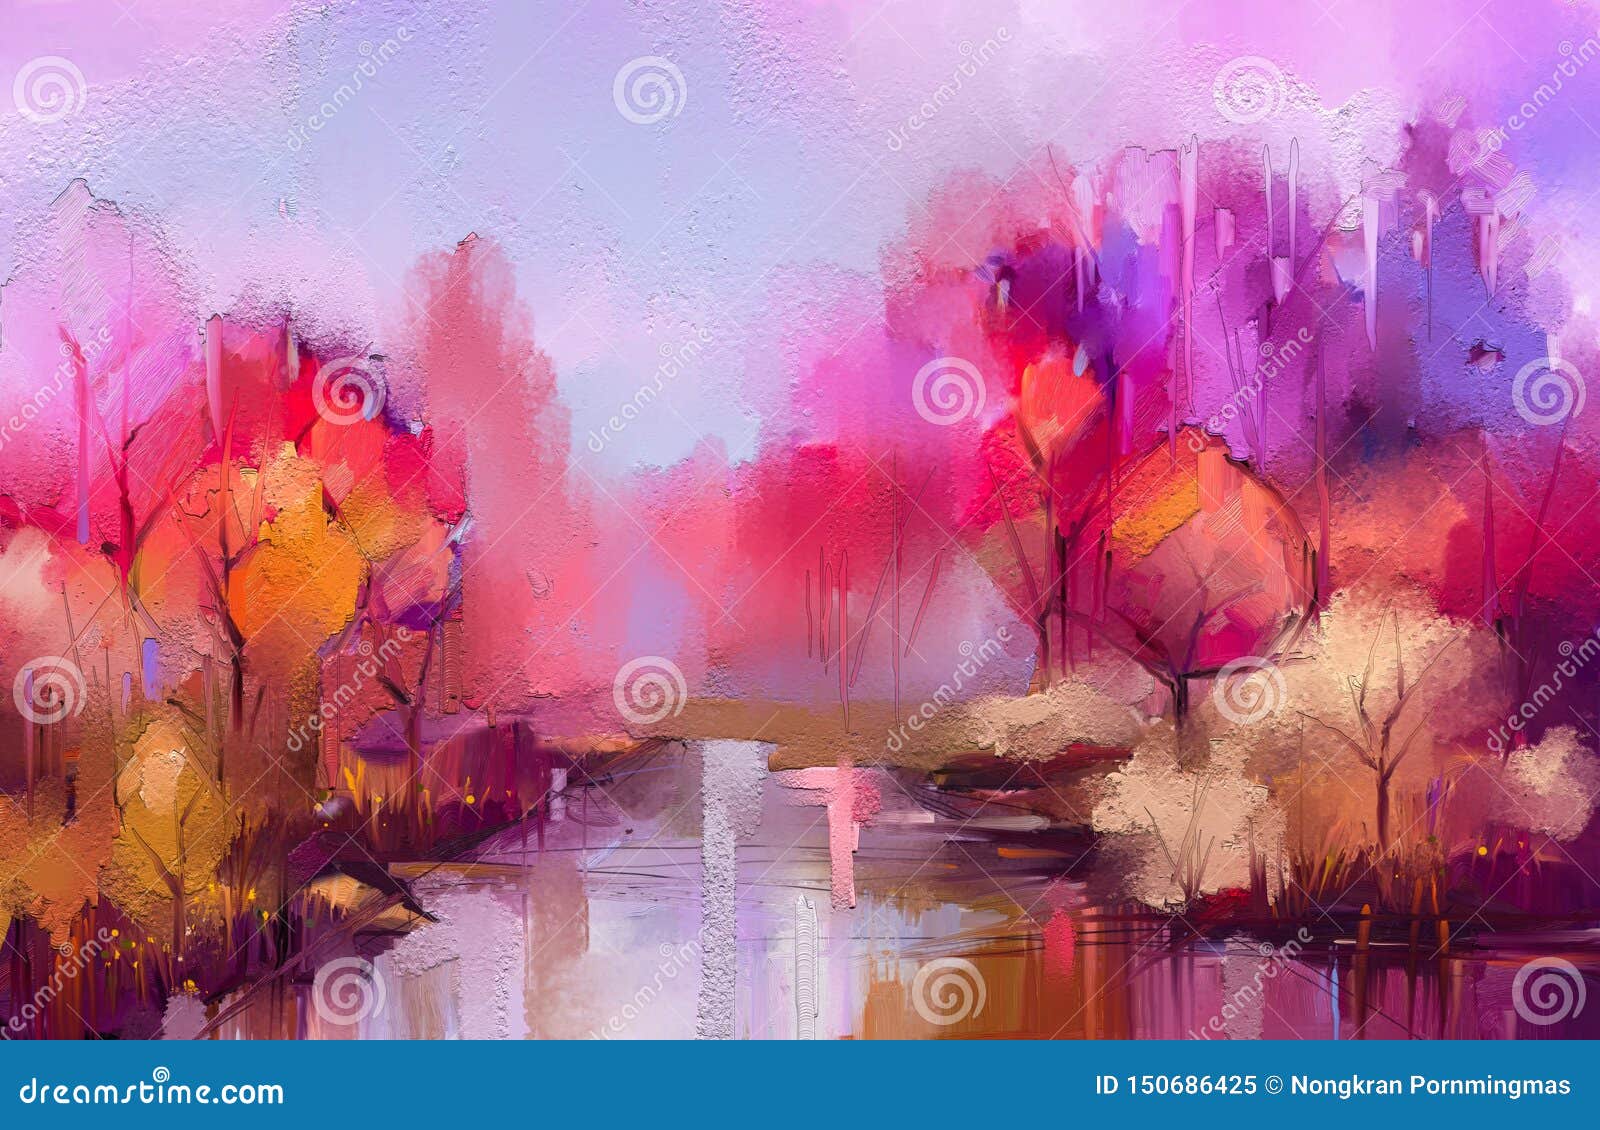 oil painting colorful autumn trees. semi abstract image of forest, landscapes with yellow - red leaf and lake.